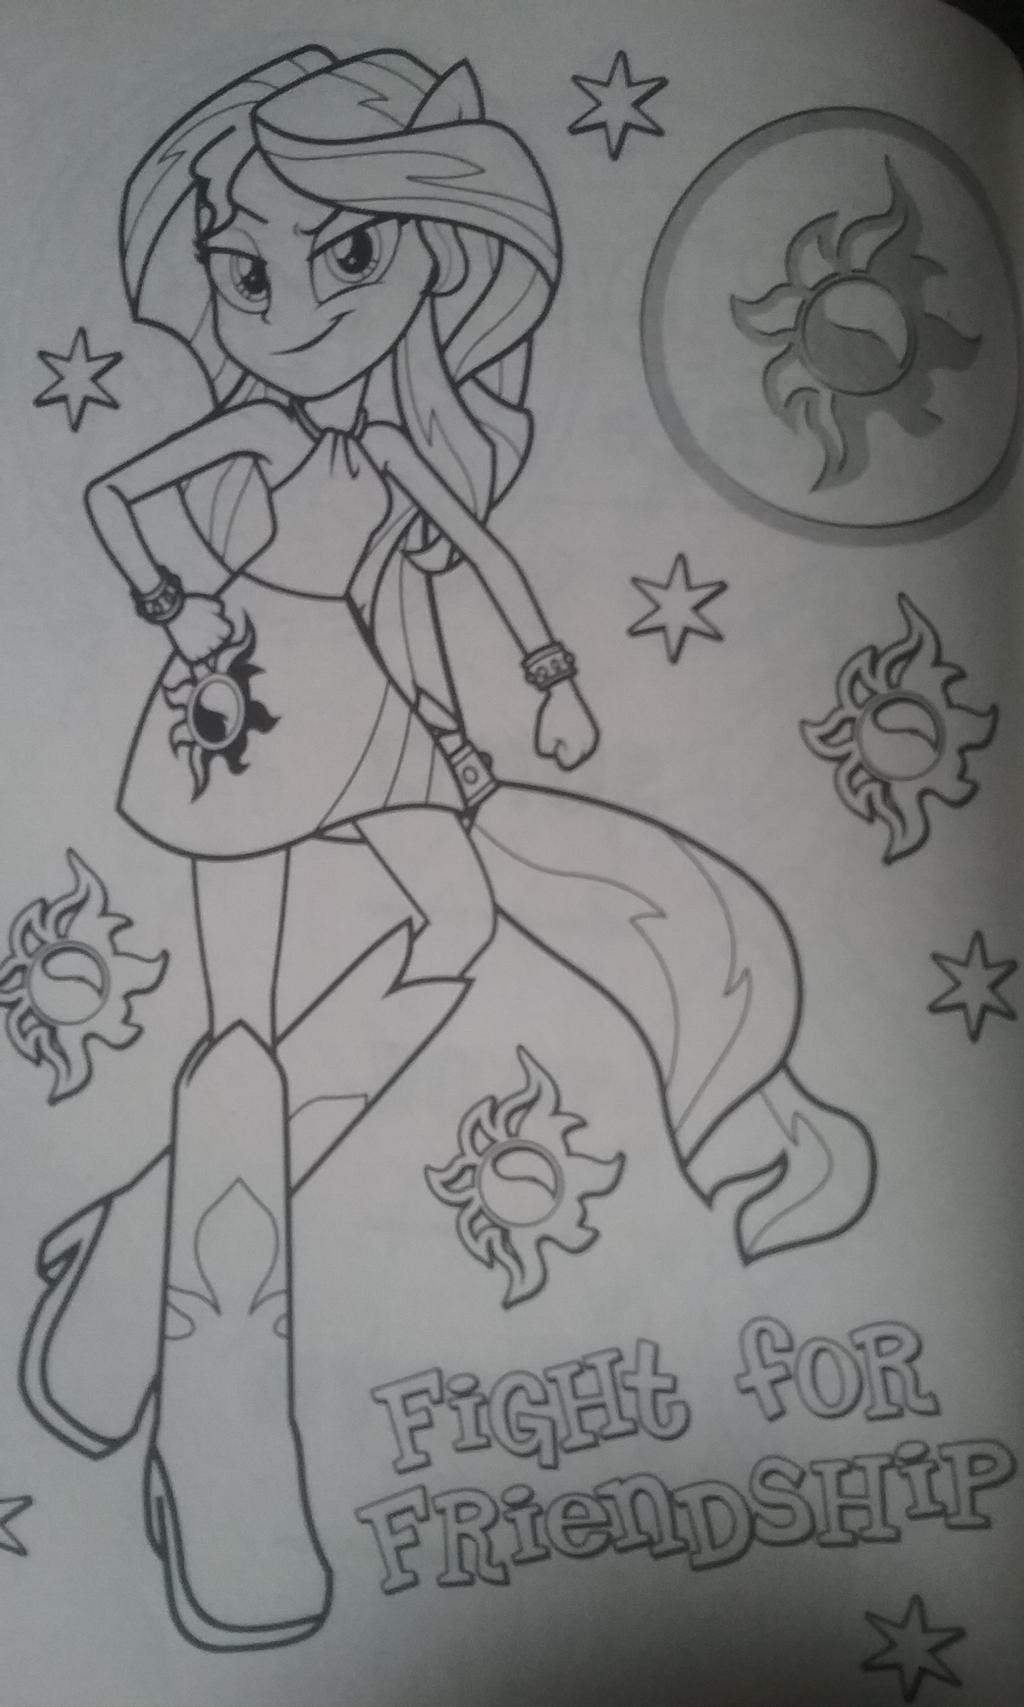 Equestria Girls Sunset Shimmer Coloring Pages
 Equestria Girls Sunset Shimmer Coloring Page by